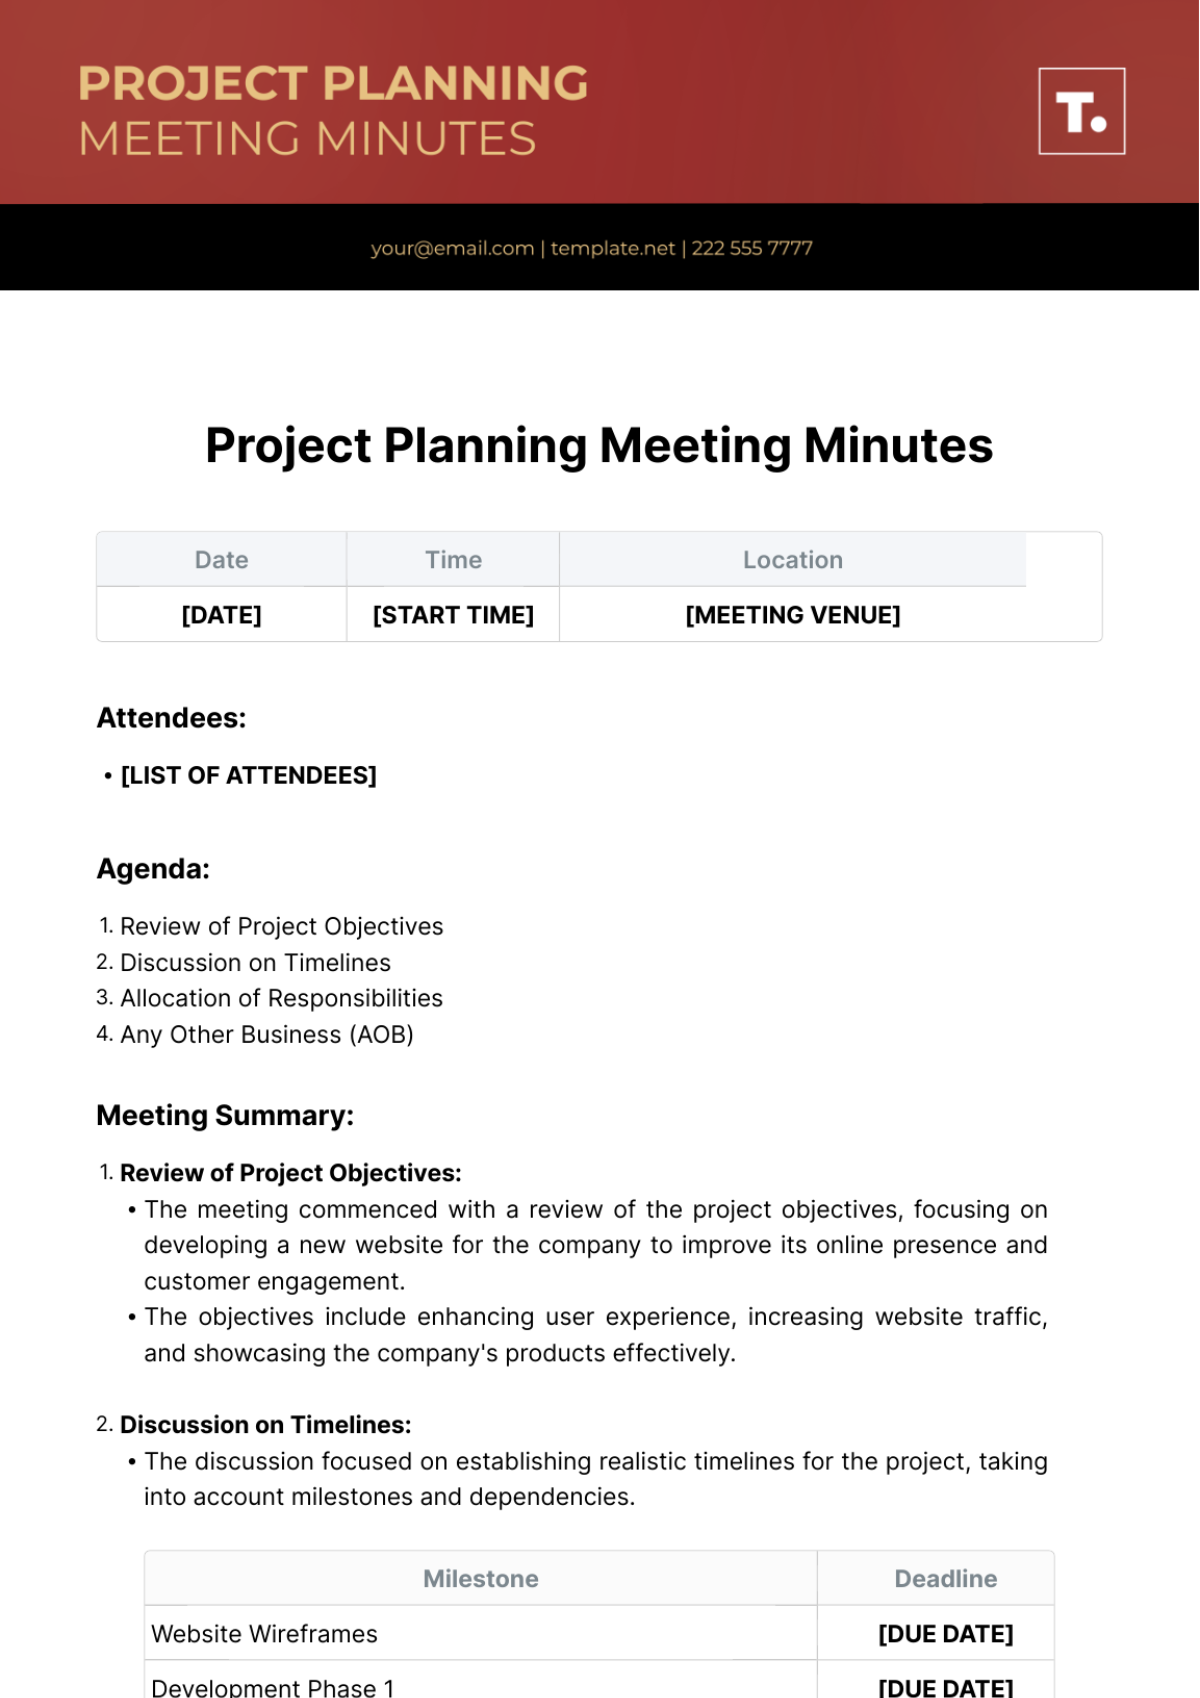 Project Planning Meeting Minutes Template